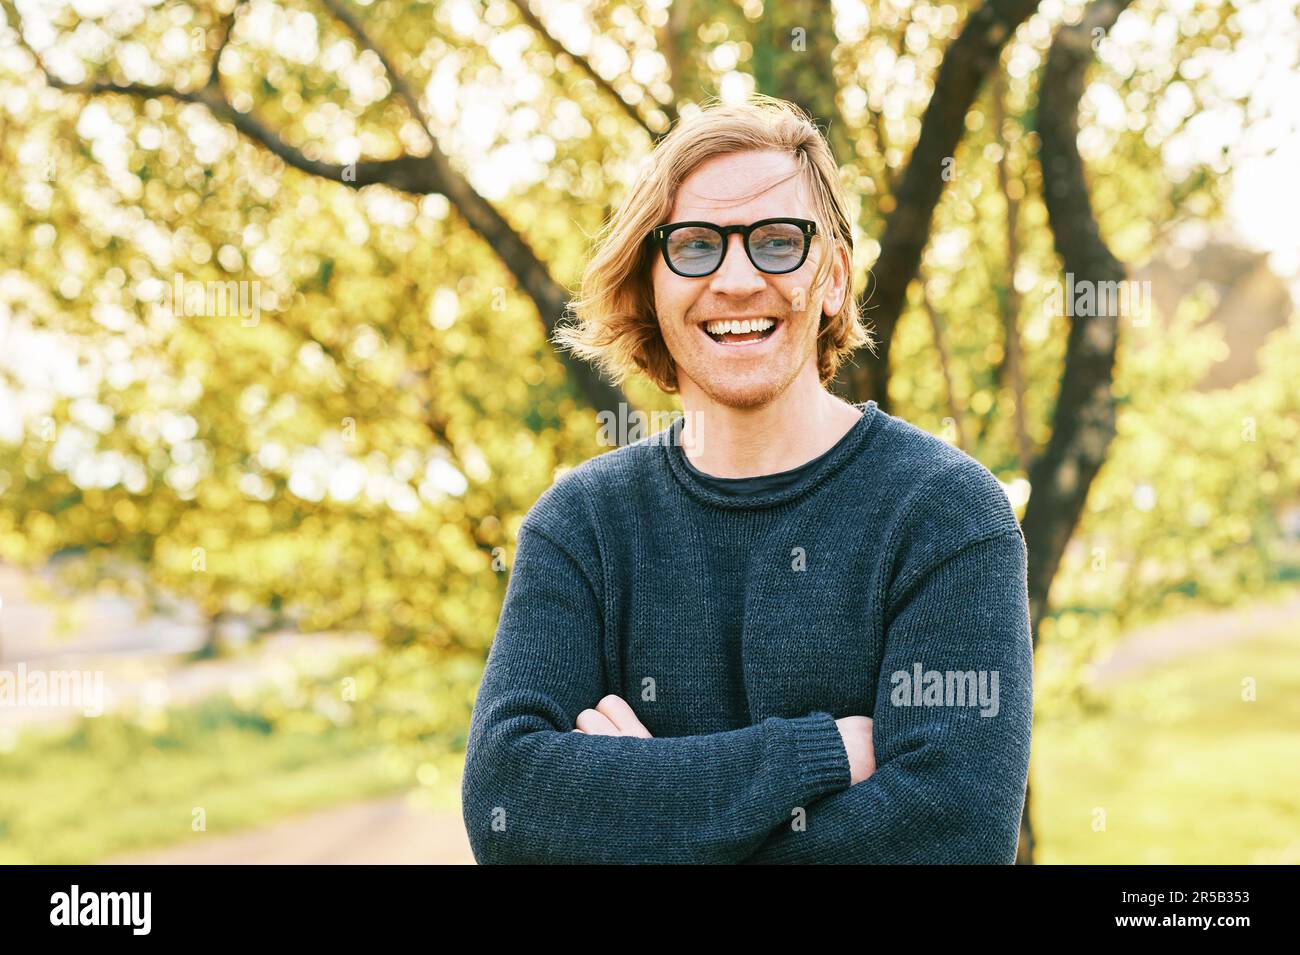 Outdoor portrait of handsome 35 - 40 year old man with red hair, posing in green sunny park, wearing blue pullover and sunglasses Stock Photo